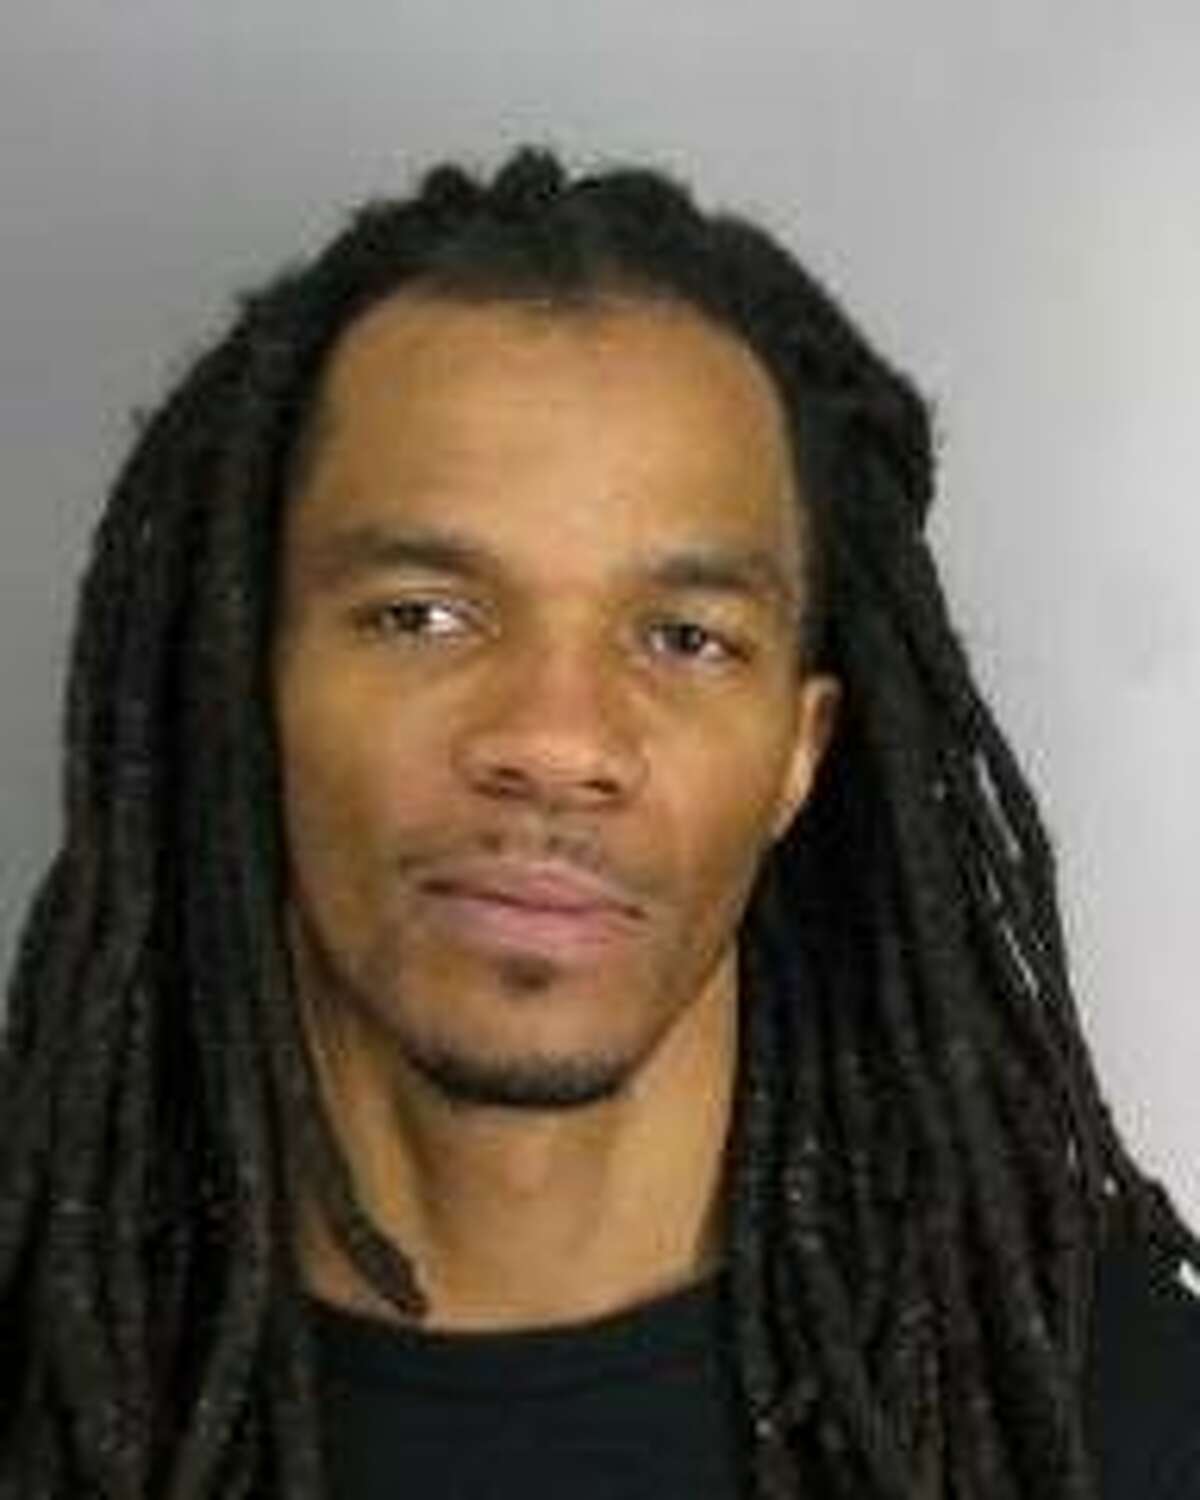 Keith Kenard Asberry, Jr. in an undated photo provided by the Albany Police Department.